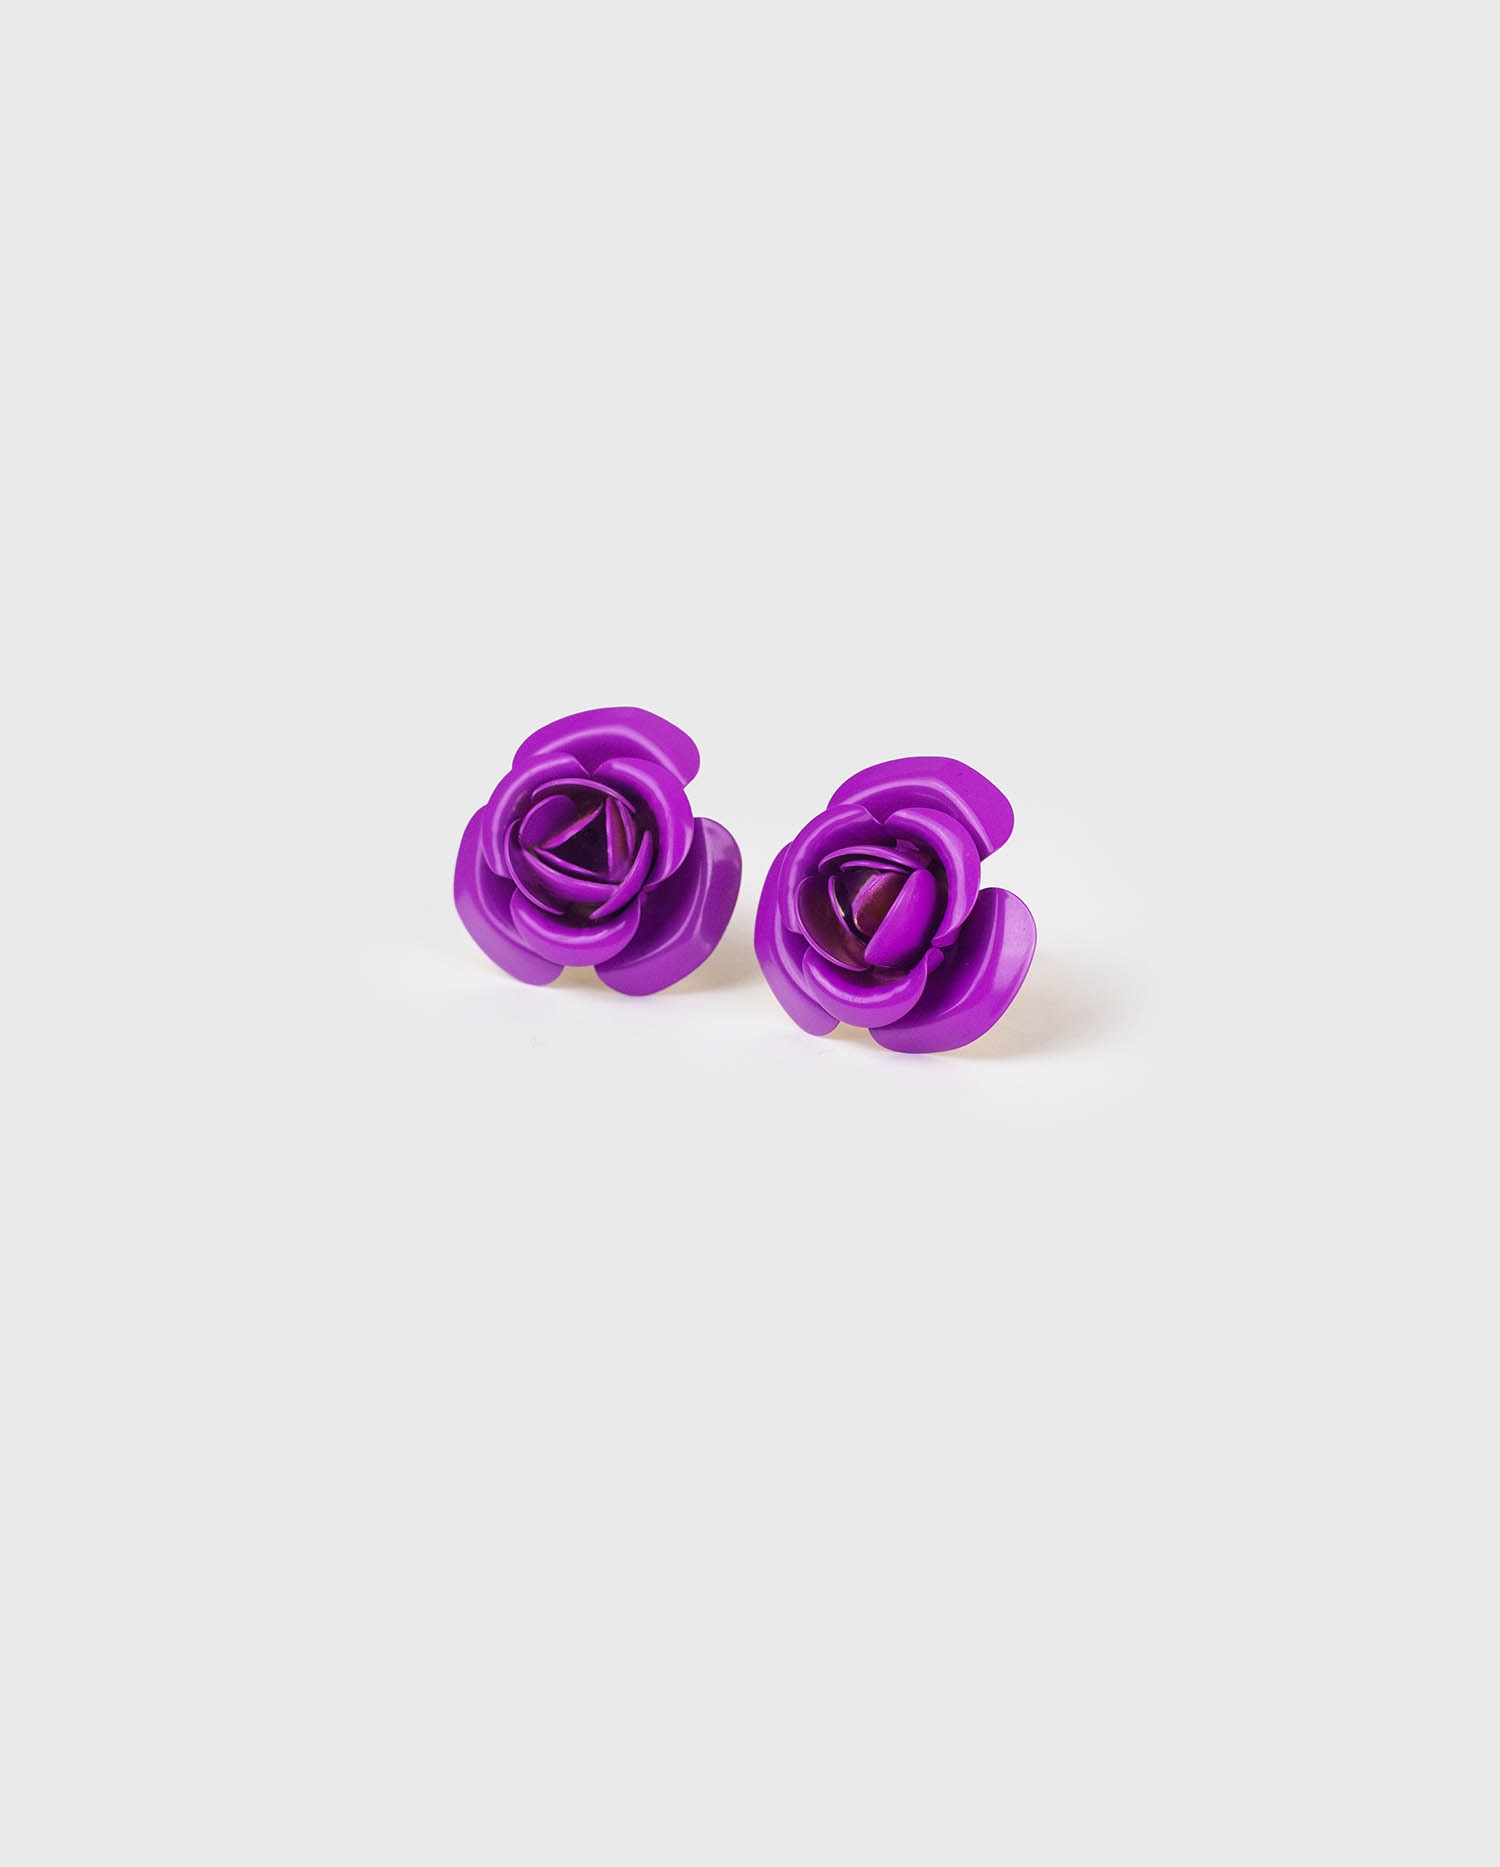 Discover the NEISSY Classic flower cufflink in anemone purple from ANNE FONTAINE